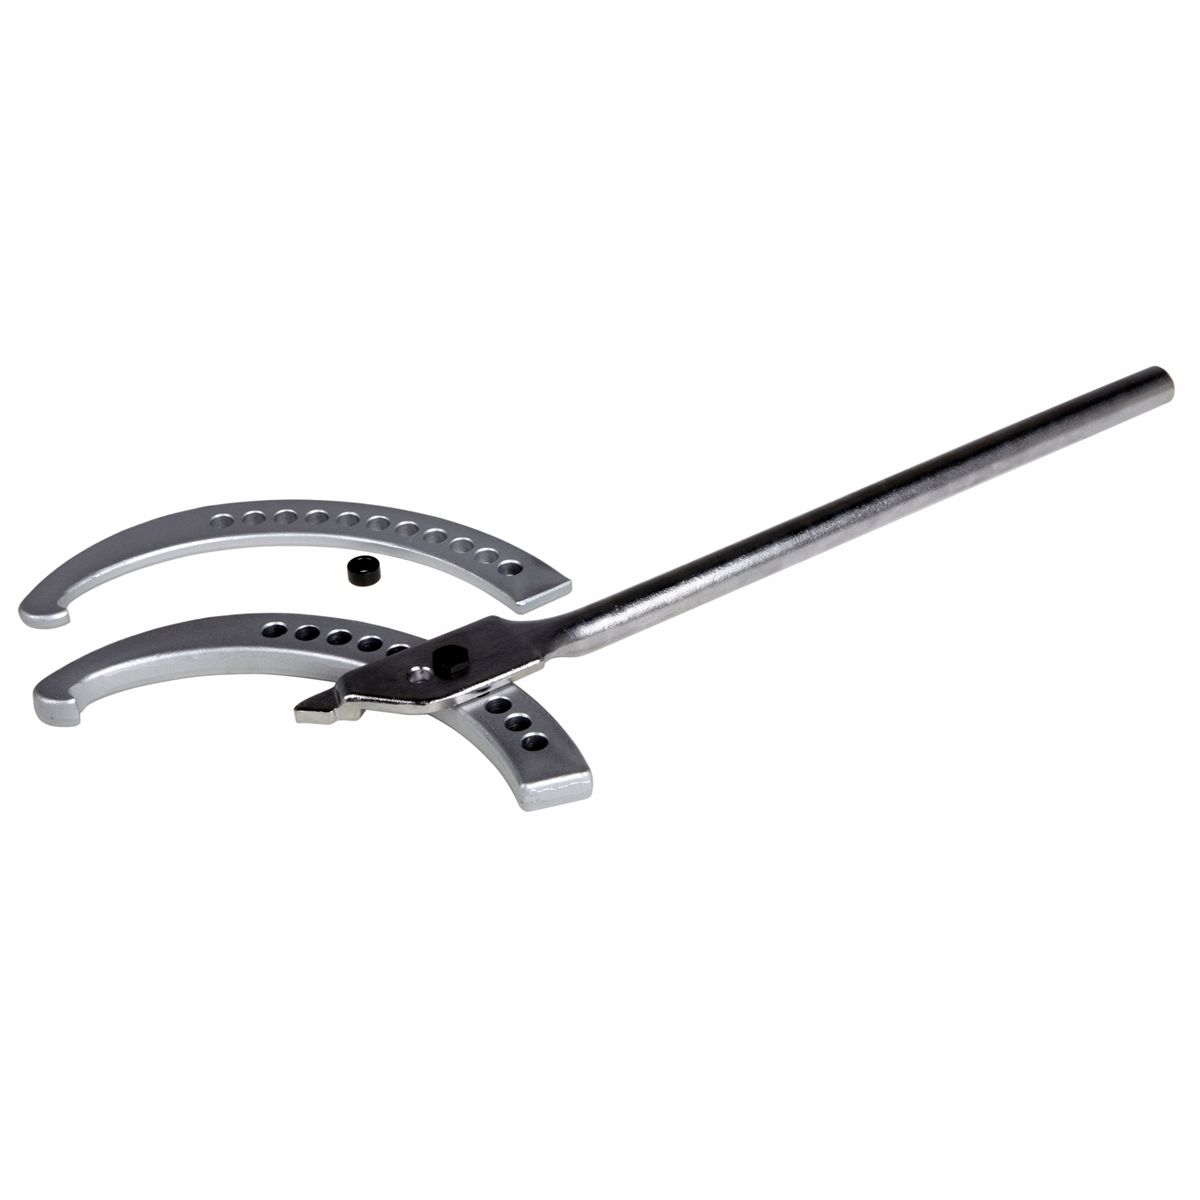 Adjustable Spanner Wrench w/ 2 Jaws